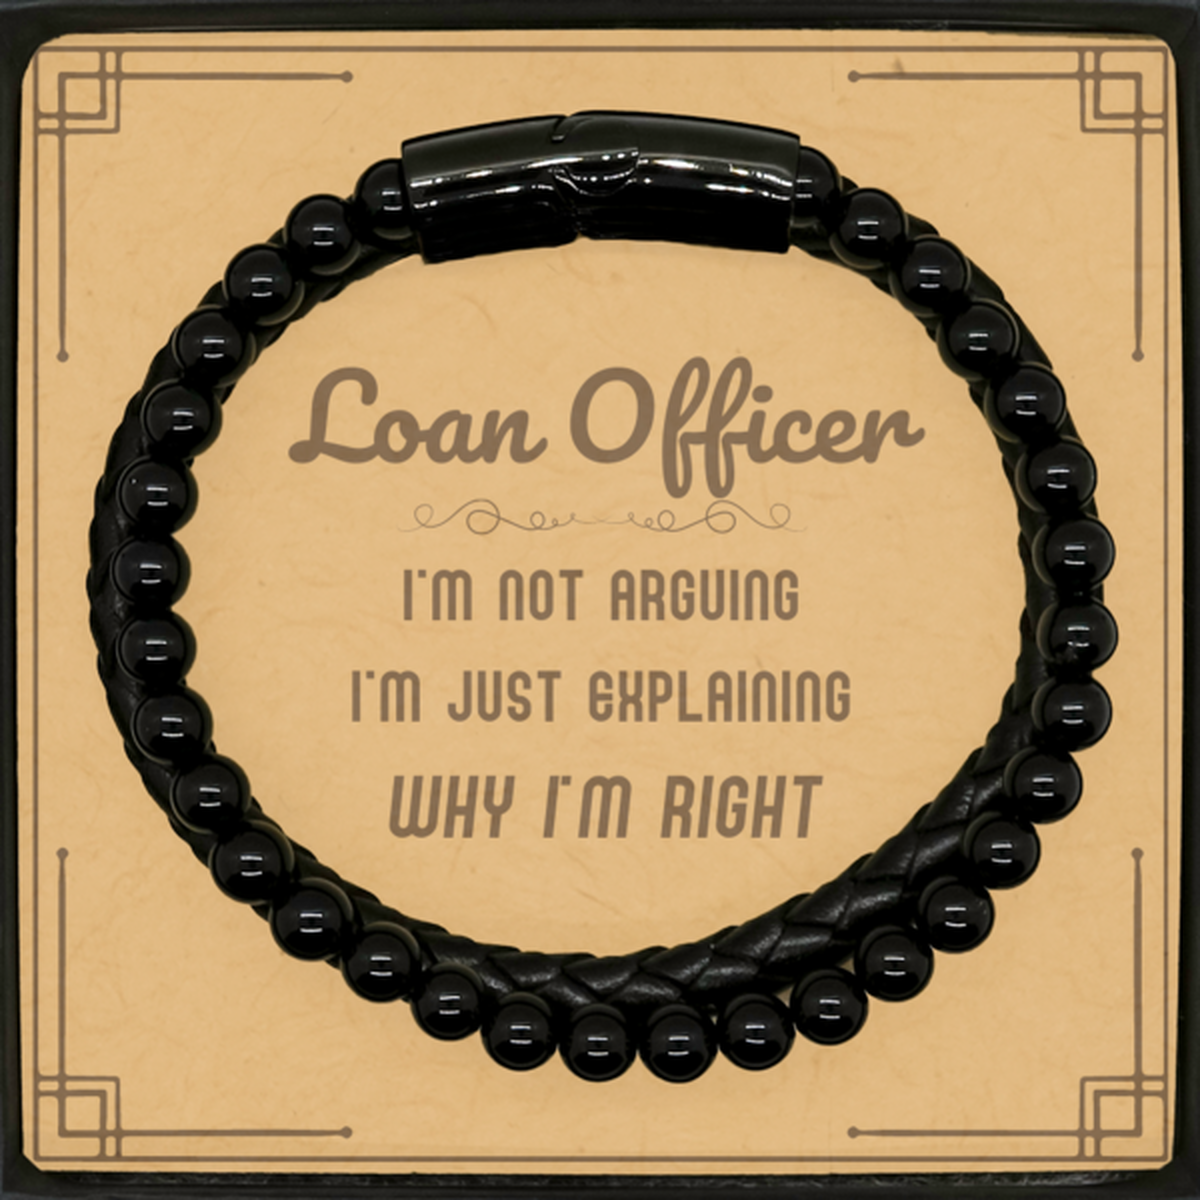 Loan Officer I'm not Arguing. I'm Just Explaining Why I'm RIGHT Stone Leather Bracelets, Funny Saying Quote Loan Officer Gifts For Loan Officer Message Card Graduation Birthday Christmas Gifts for Men Women Coworker